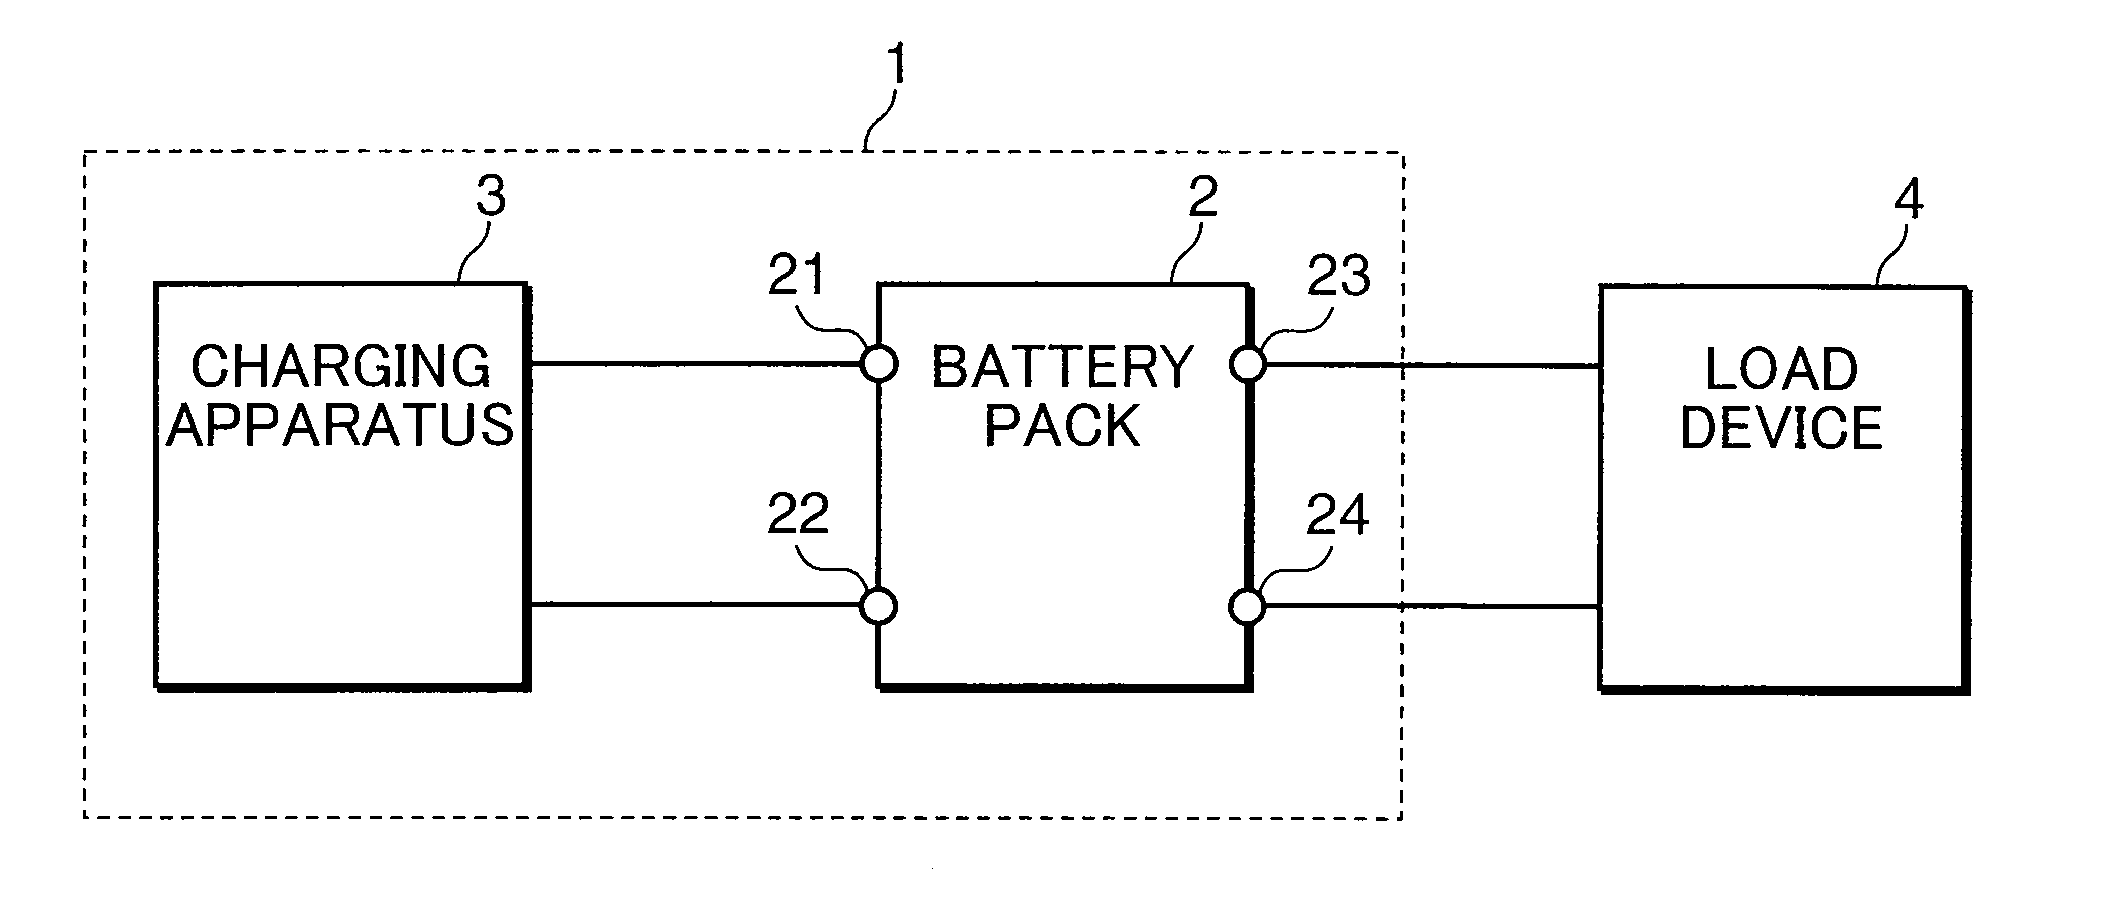 Battery pack, and battery system